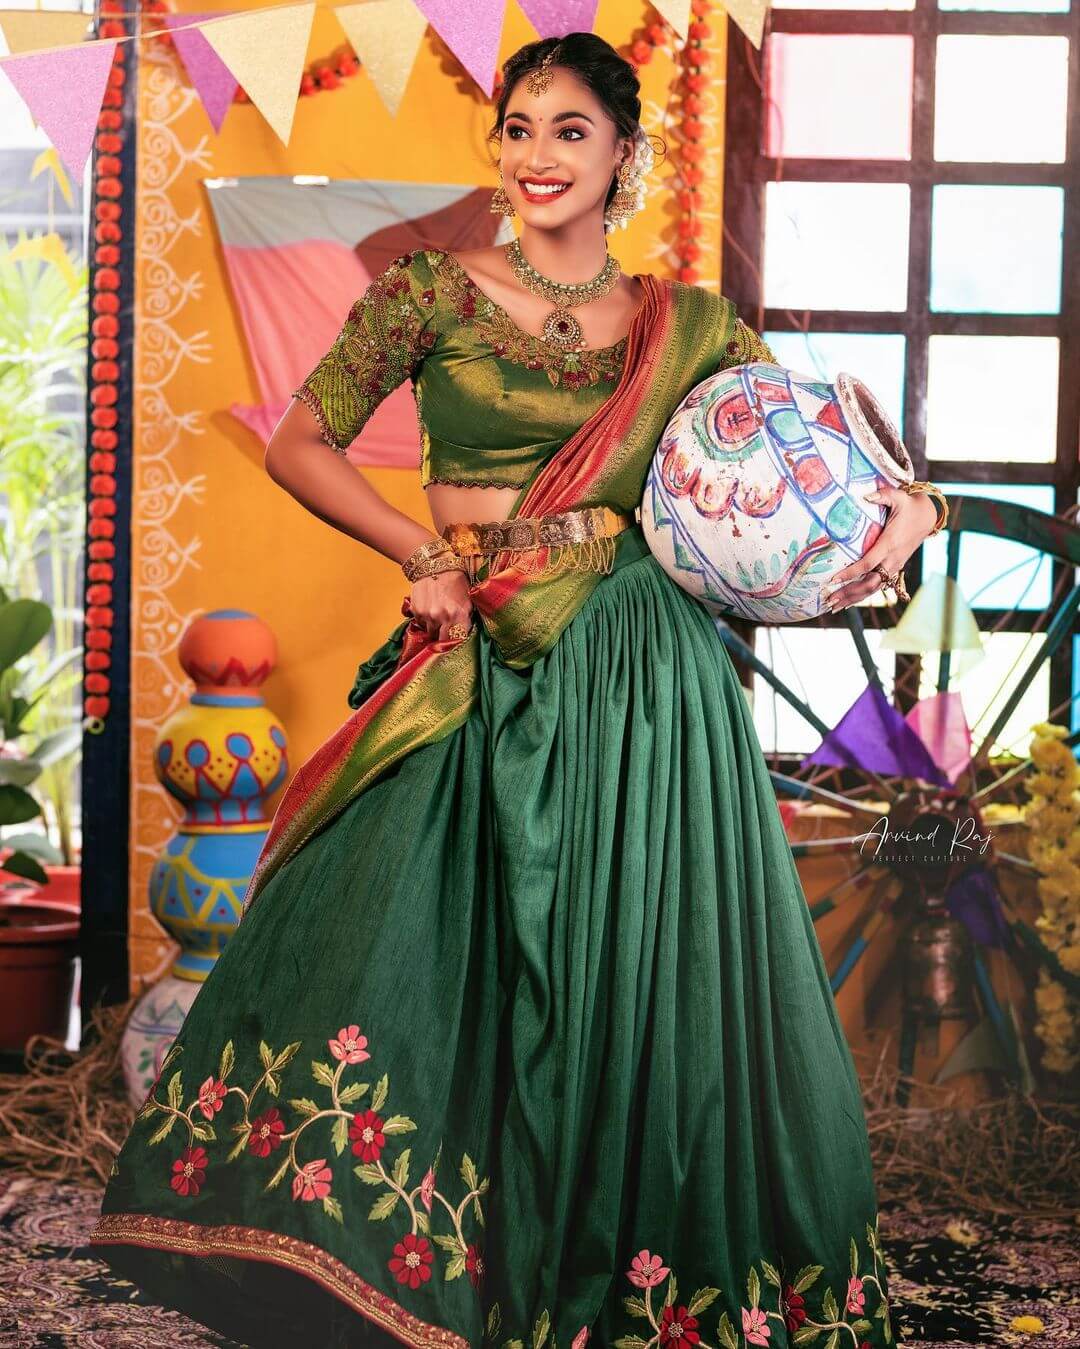 Tollywood Actress Anukreethy Vas In Green Floral Embroidered Lehenga Paired With Peach & Green Silk Dupatta